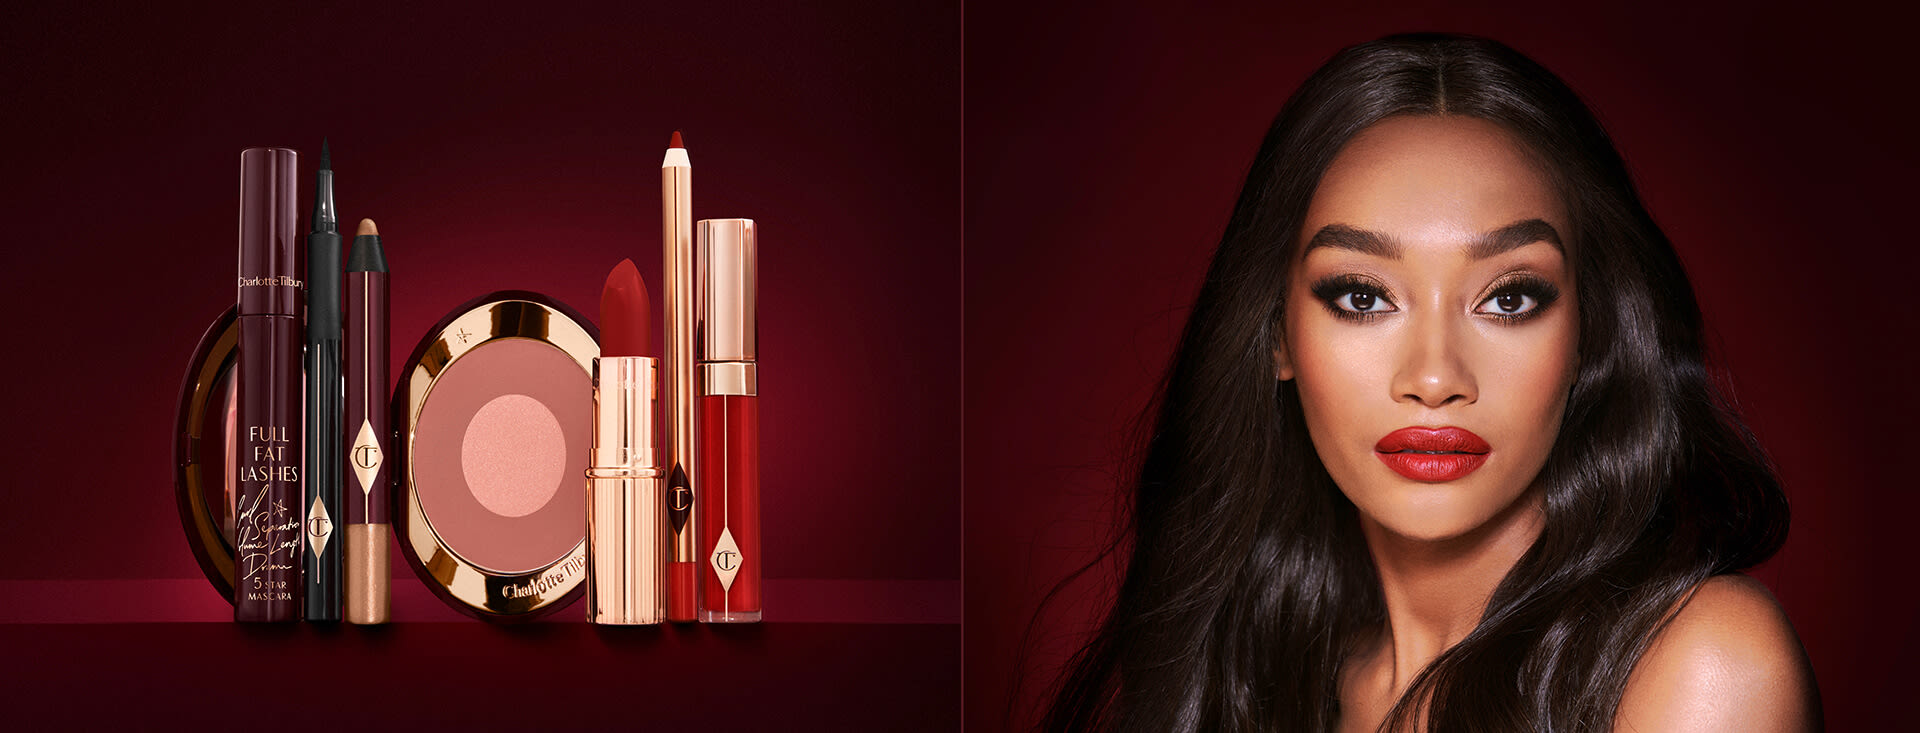 A deep-tone model with brown eyes wearing shimmery bronze eye makeup with muted pink blush and glossy scarlet-red lips, along with an open two-tone blush in cool-toned terracotta and warm pink with a mascara, eyeliner pen, an open lipstick in bold red, lip liner pencil in blood-red, and a lip gloss in bright red. 